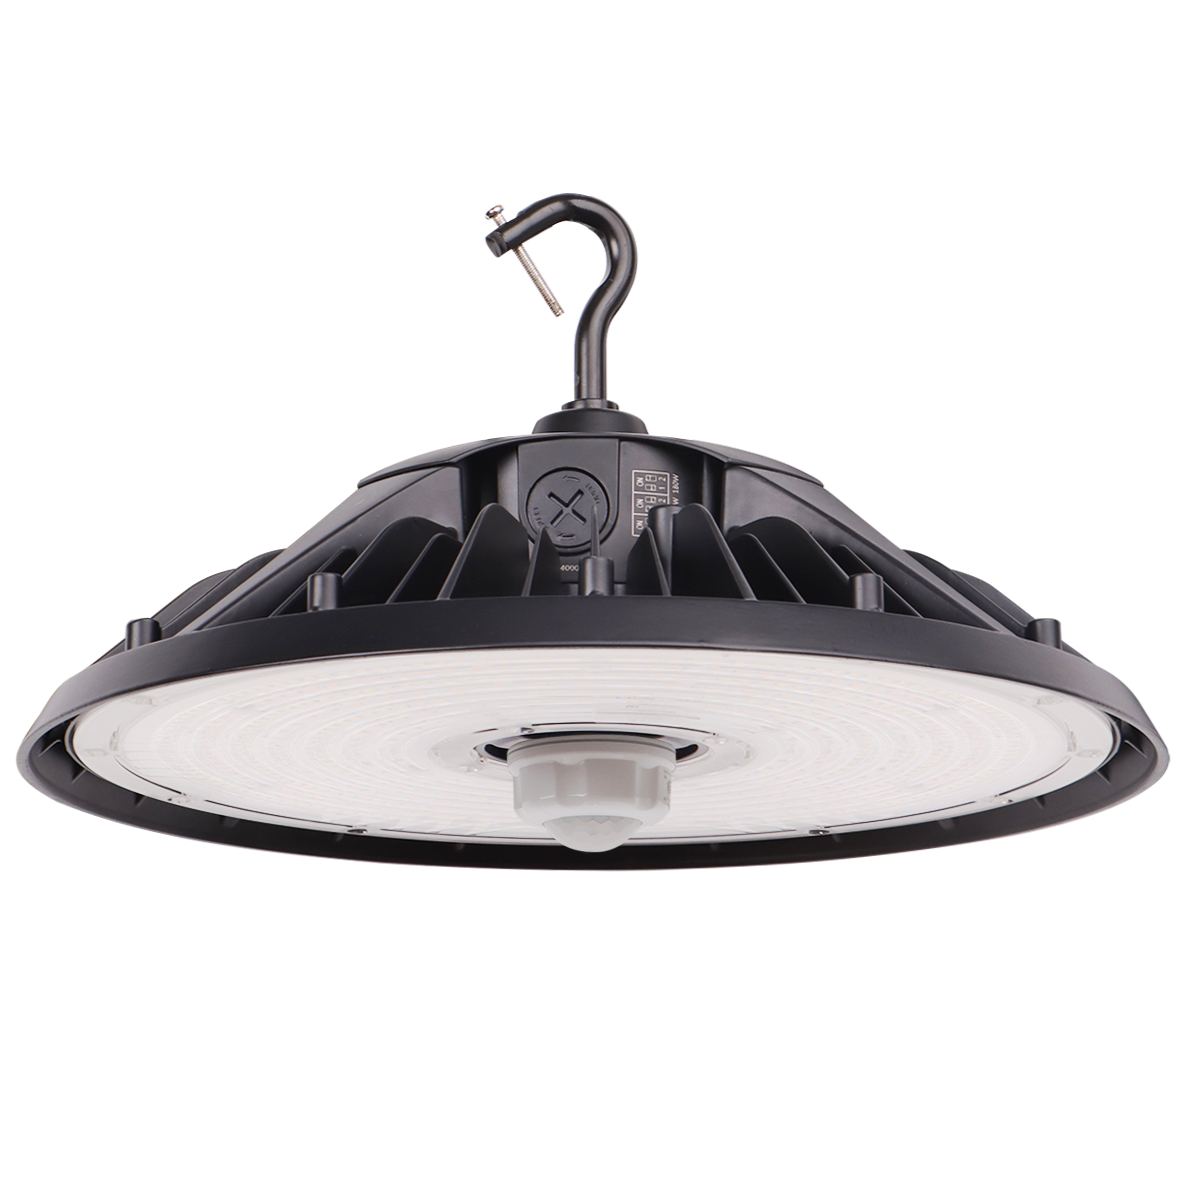 240W Tunable UFO LED High Bay Light - Selectable Wattage (240W /200W/180W) & CCT (4000K/5000K), 36,240 Lumens, 0-10V Dimmable - UL & DLC 5.1 Certified - Eco LED Lightings 